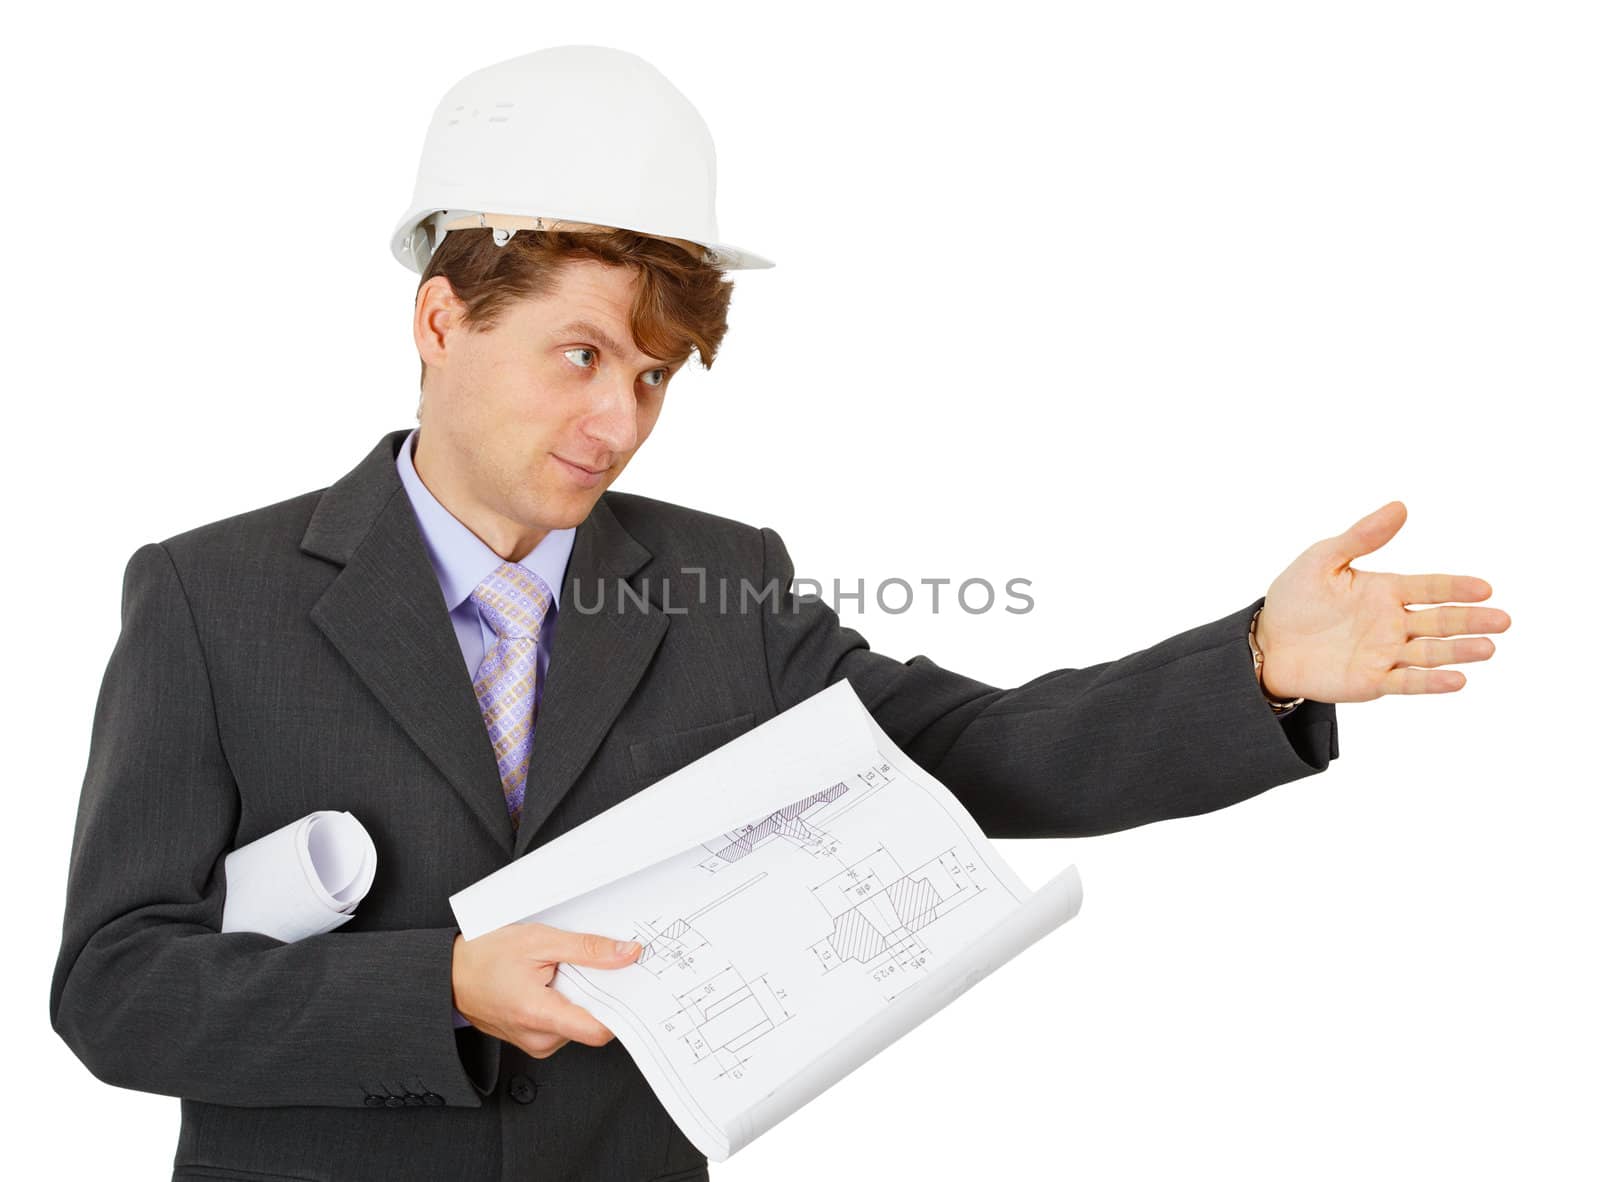 Foreman in a protective helmet shows his hand